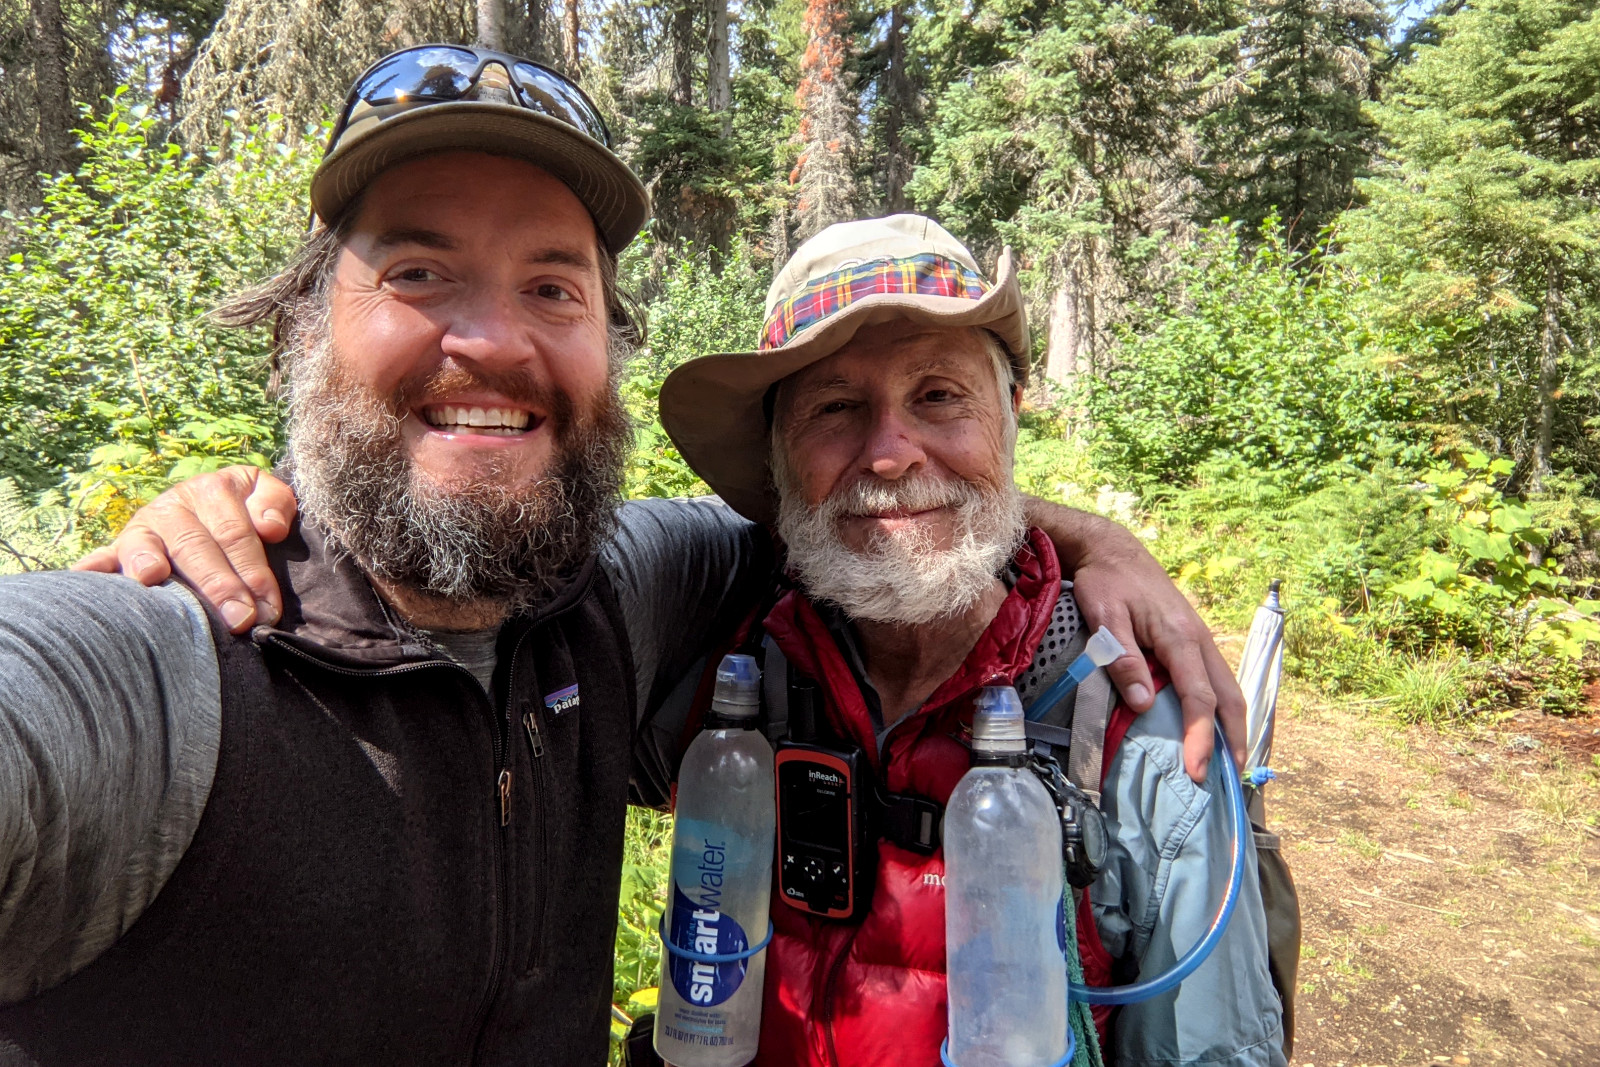 Justin and Dad/Tartan together at Reynolds Creek Backcountry Campground in Glacier National Park